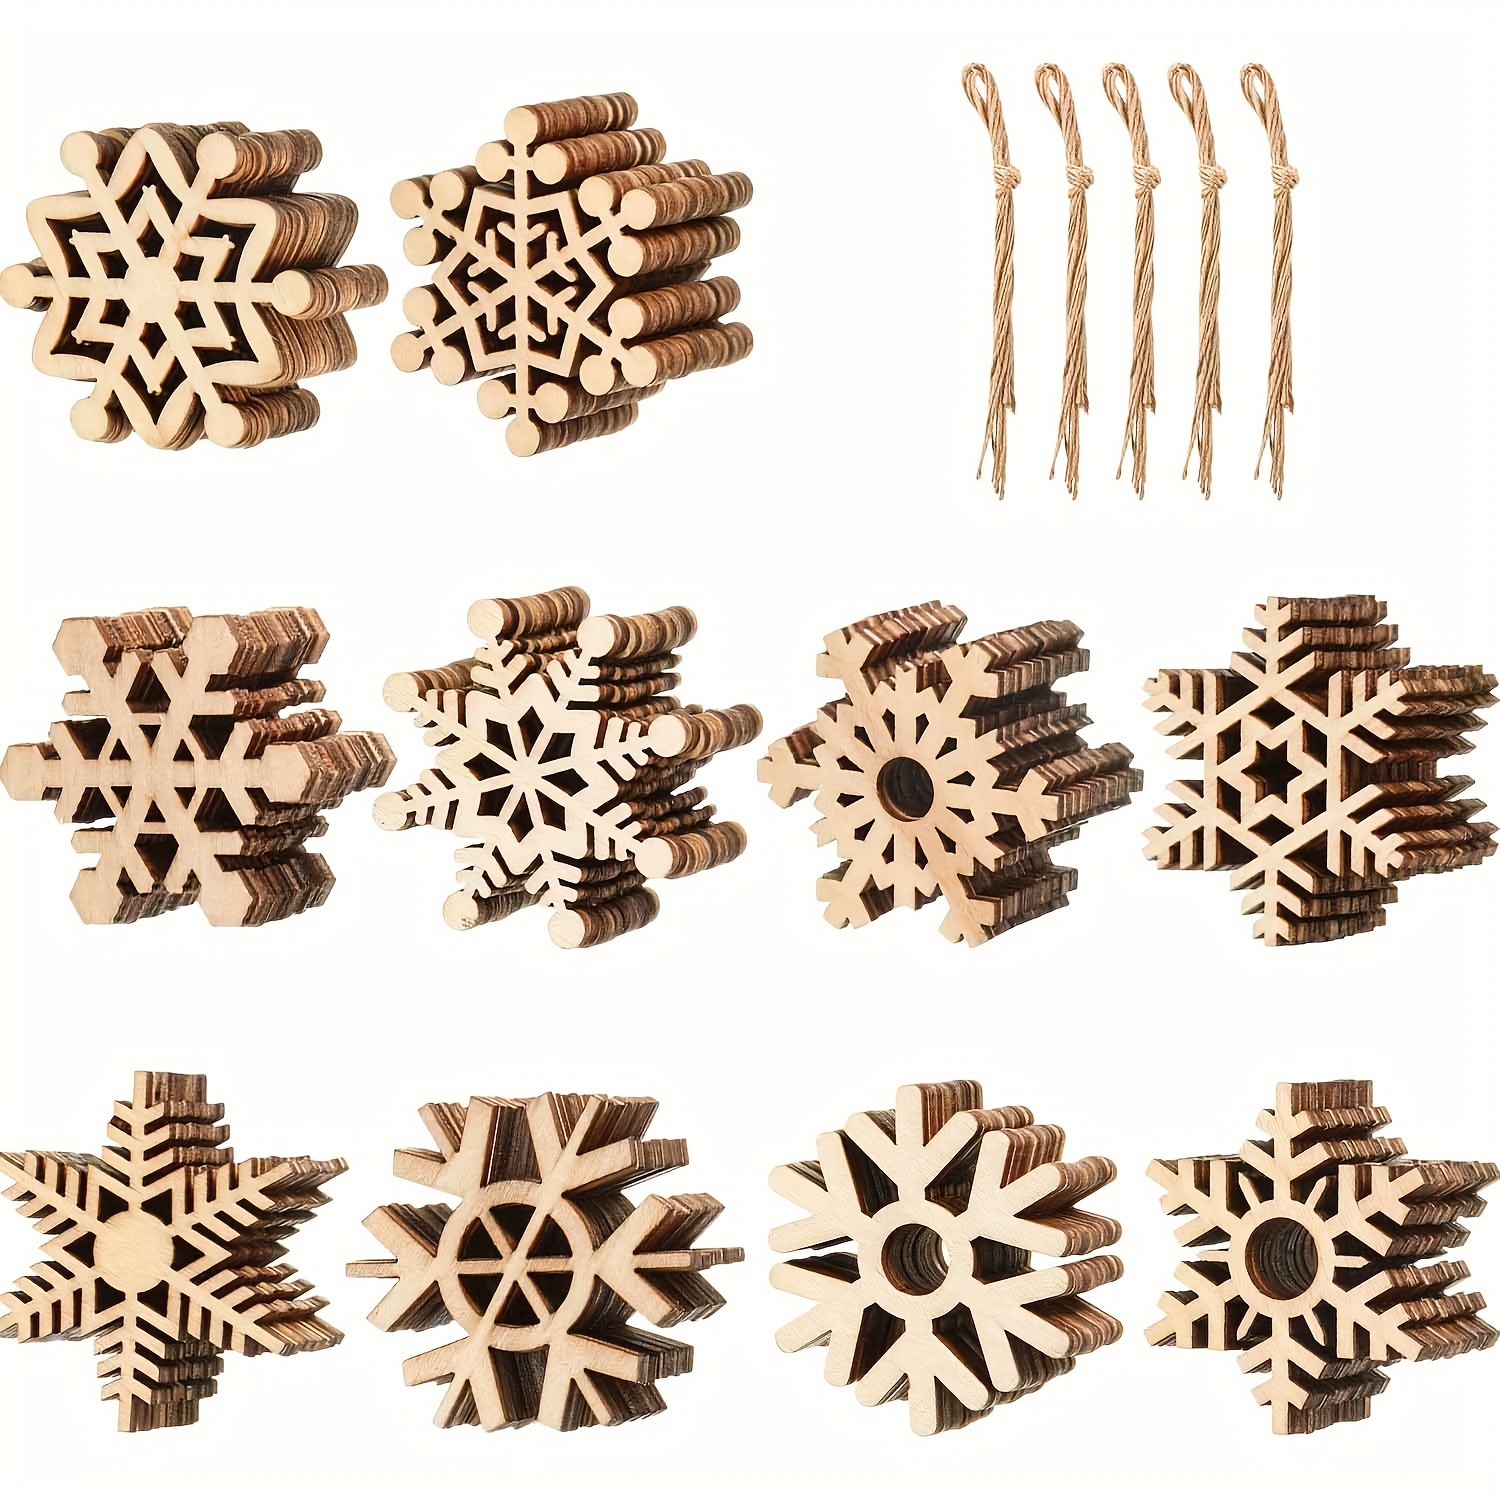 100pcs Wooden Snowflakes Embellishments Cutouts Craft Ornaments Unfinished Wood Snowflake Hanging Ornaments, Men's, Size: One size, Brown